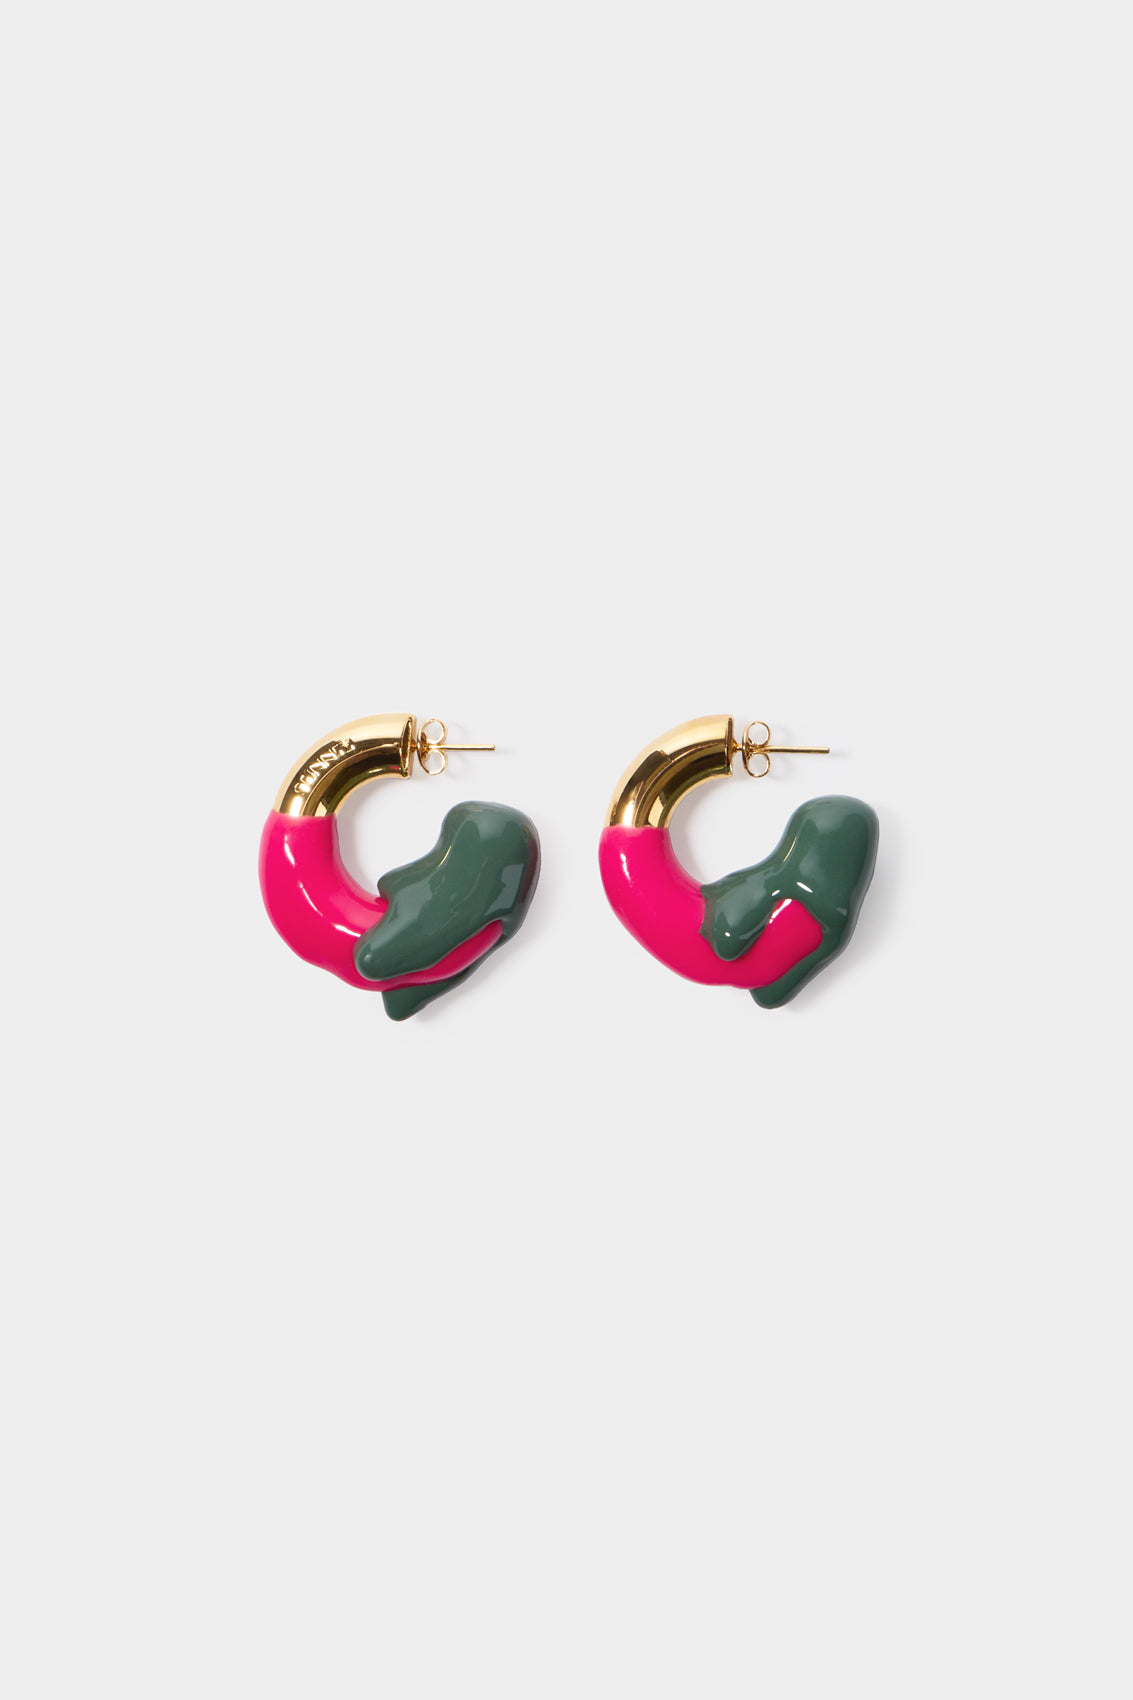 SMALL RUBBERIZED EARRINGS GOLD / fuxia & military green